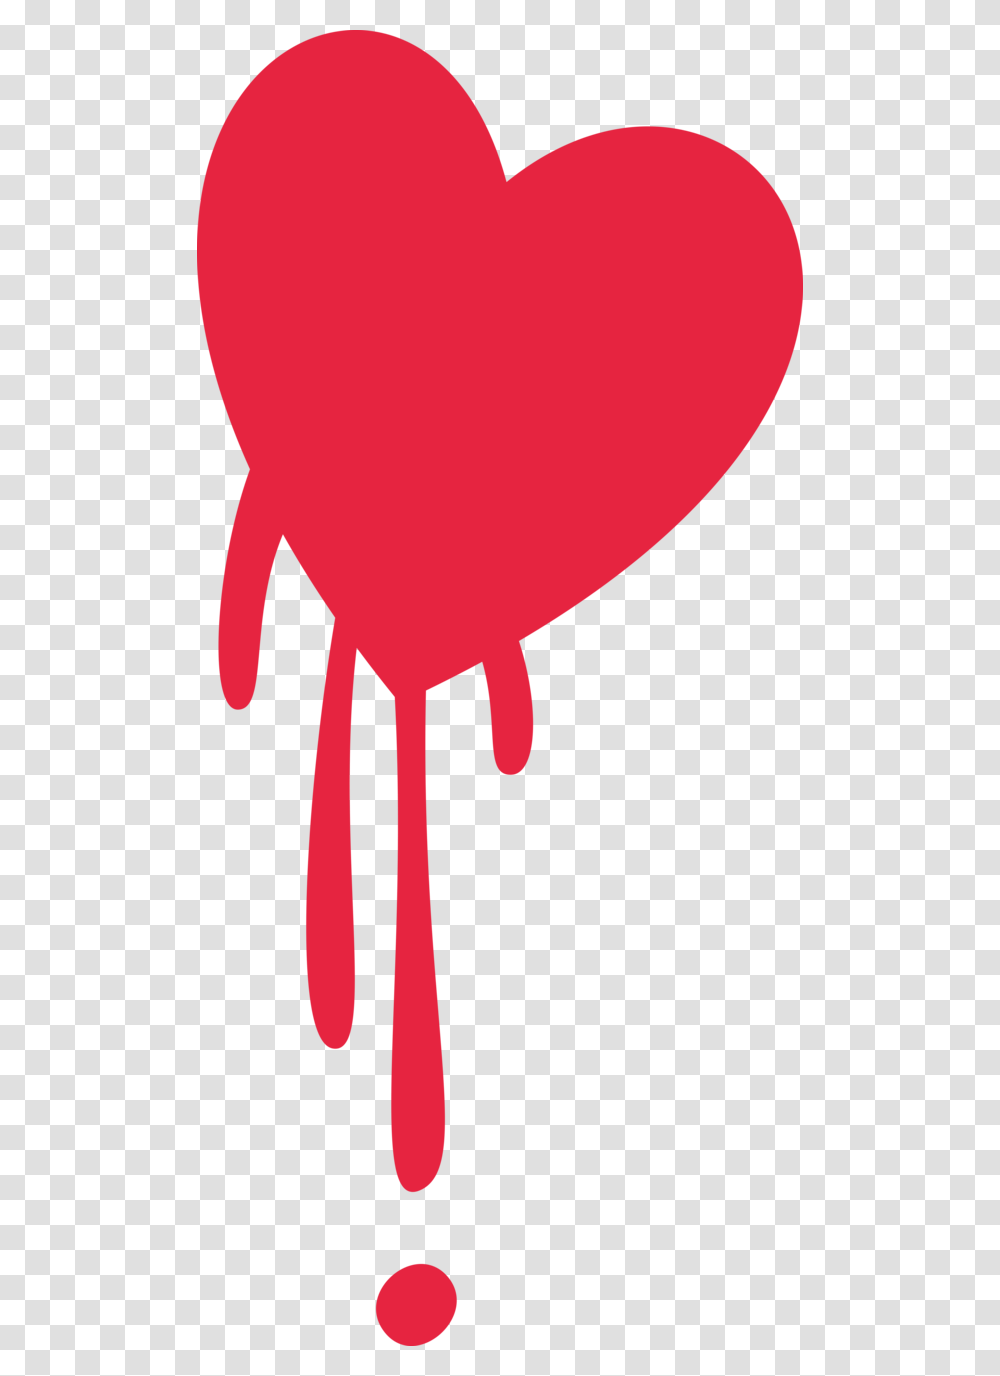 Heart Cutie Mark Crusaders Clip Art Bleeding Blooding Heart Without Background, Glass, Ball, Beverage, Drink Transparent Png